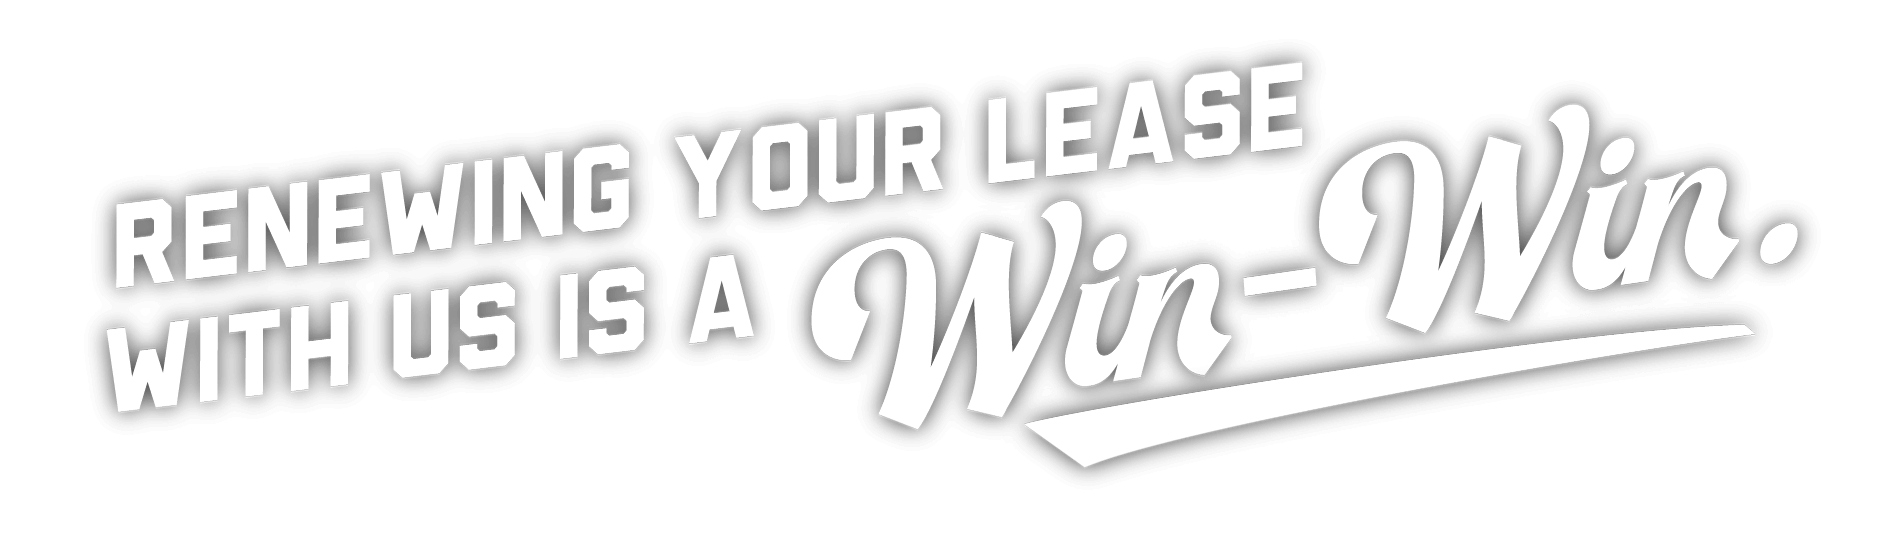 Renewing your lease with us is a win-win.